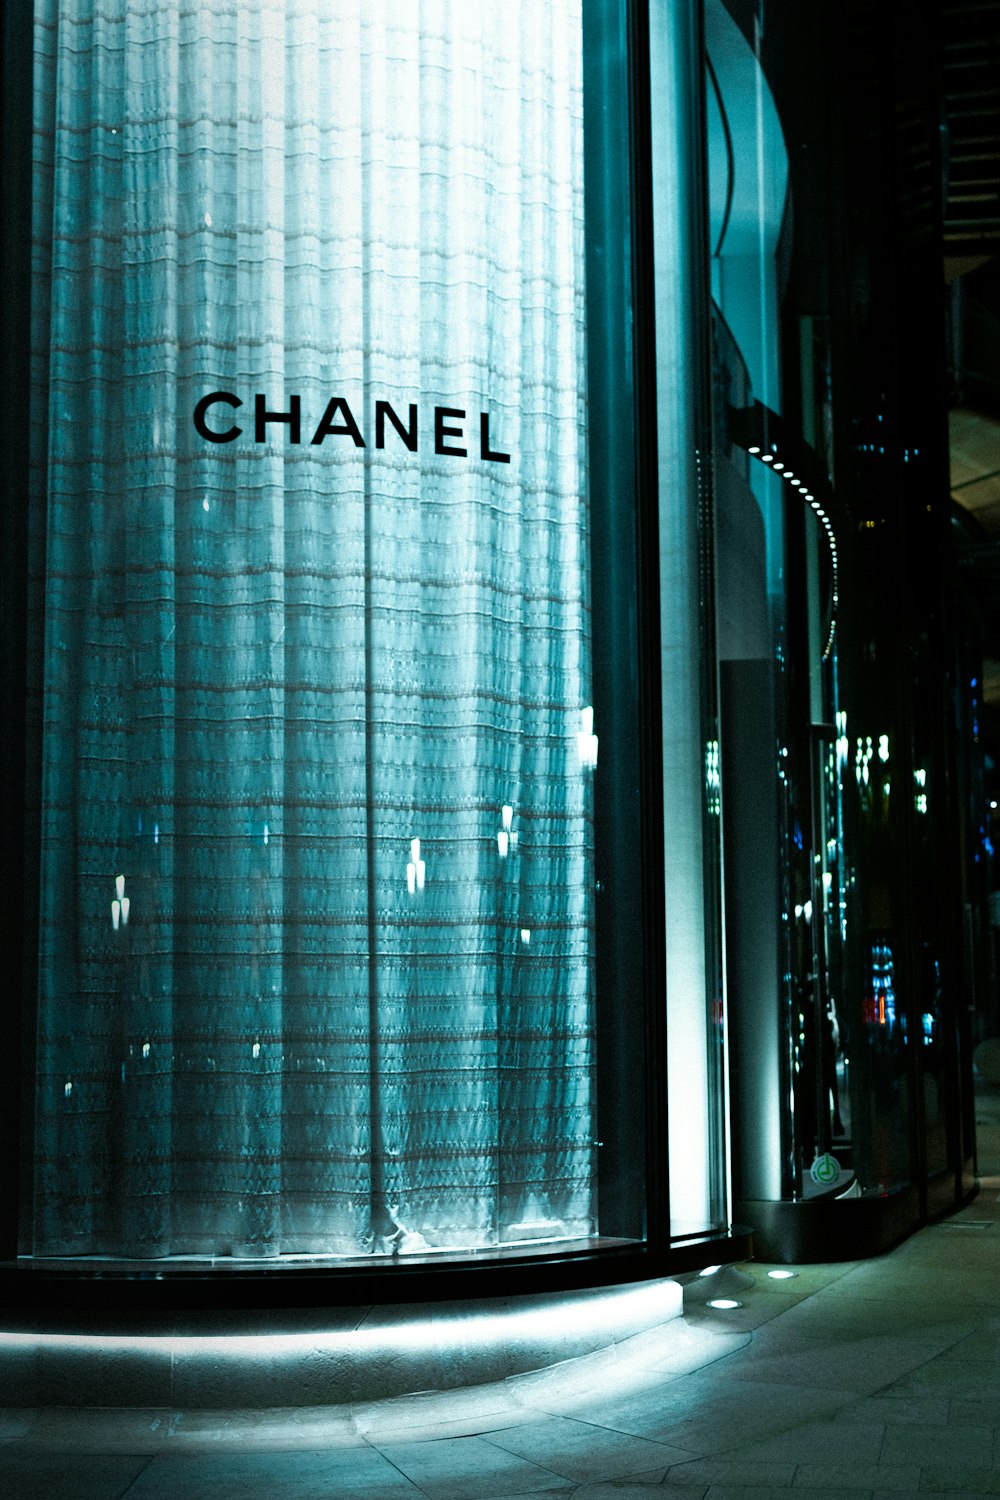 a chanel store front with the word chanel on it